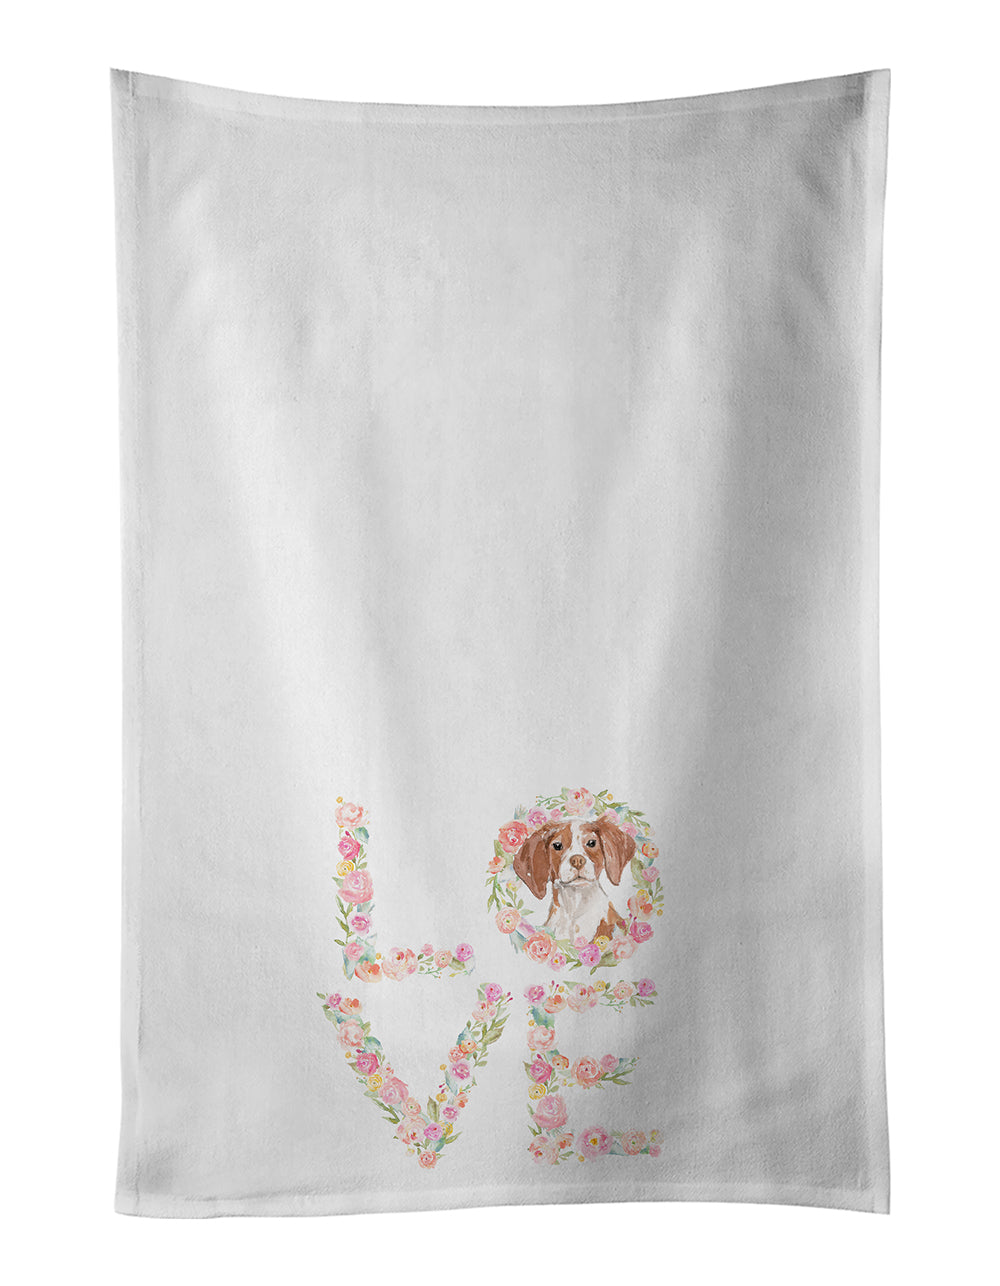 Buy this Brittany Love White Kitchen Towel Set of 2 Dish Towels